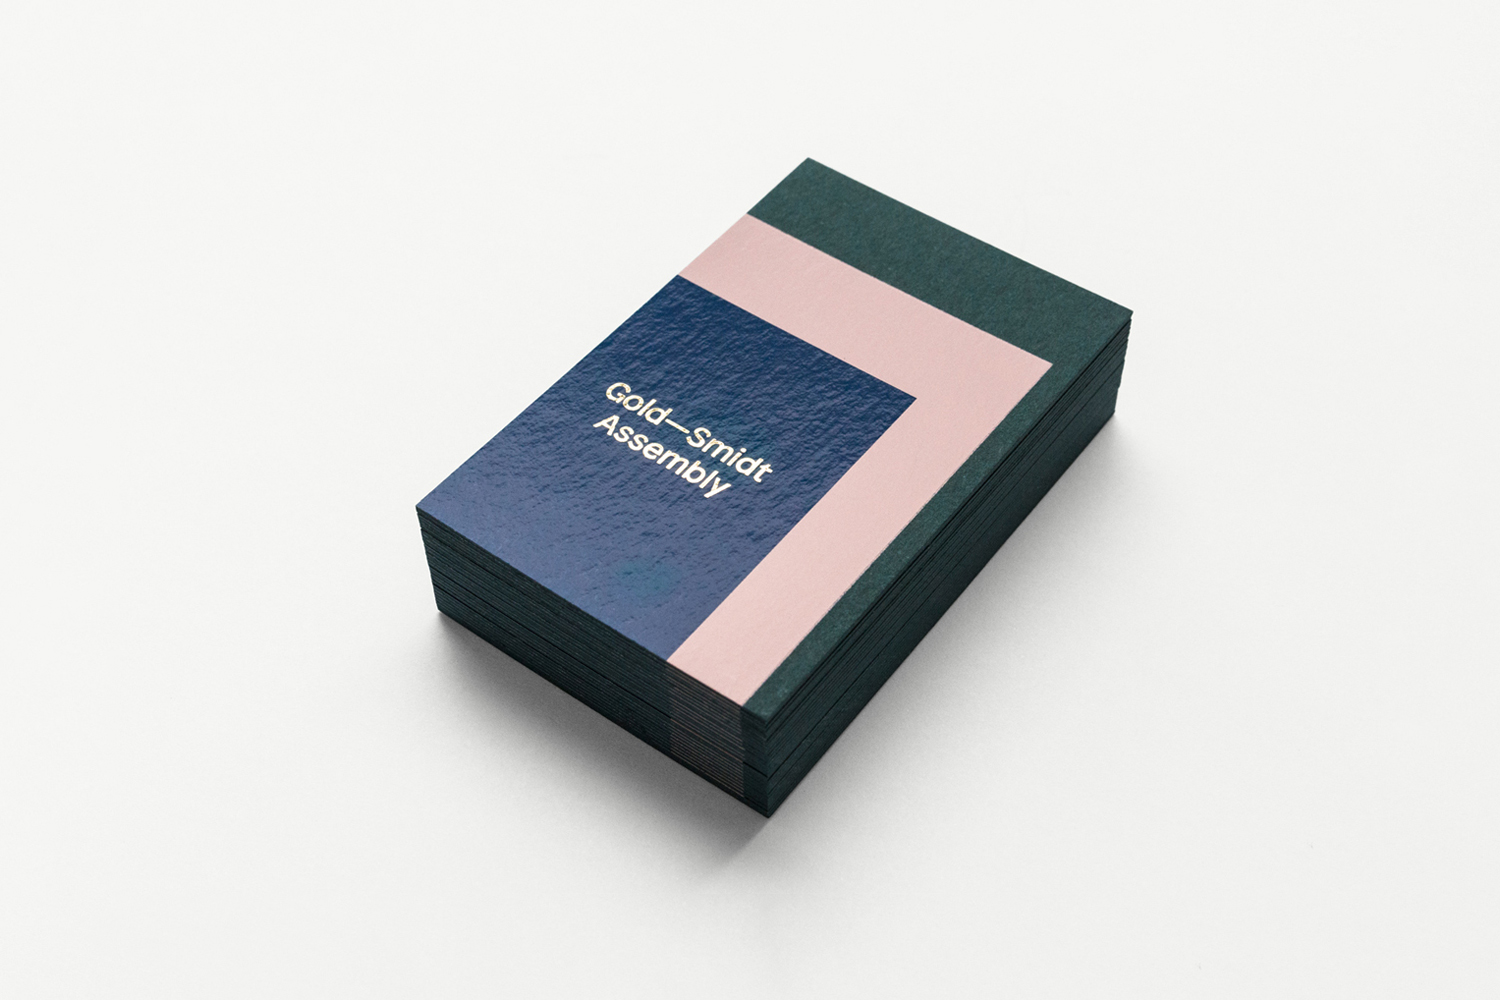 Brand identity and print by Copenhagen design studio Republic for pop-up art gallery Gold—Smidt Assembly